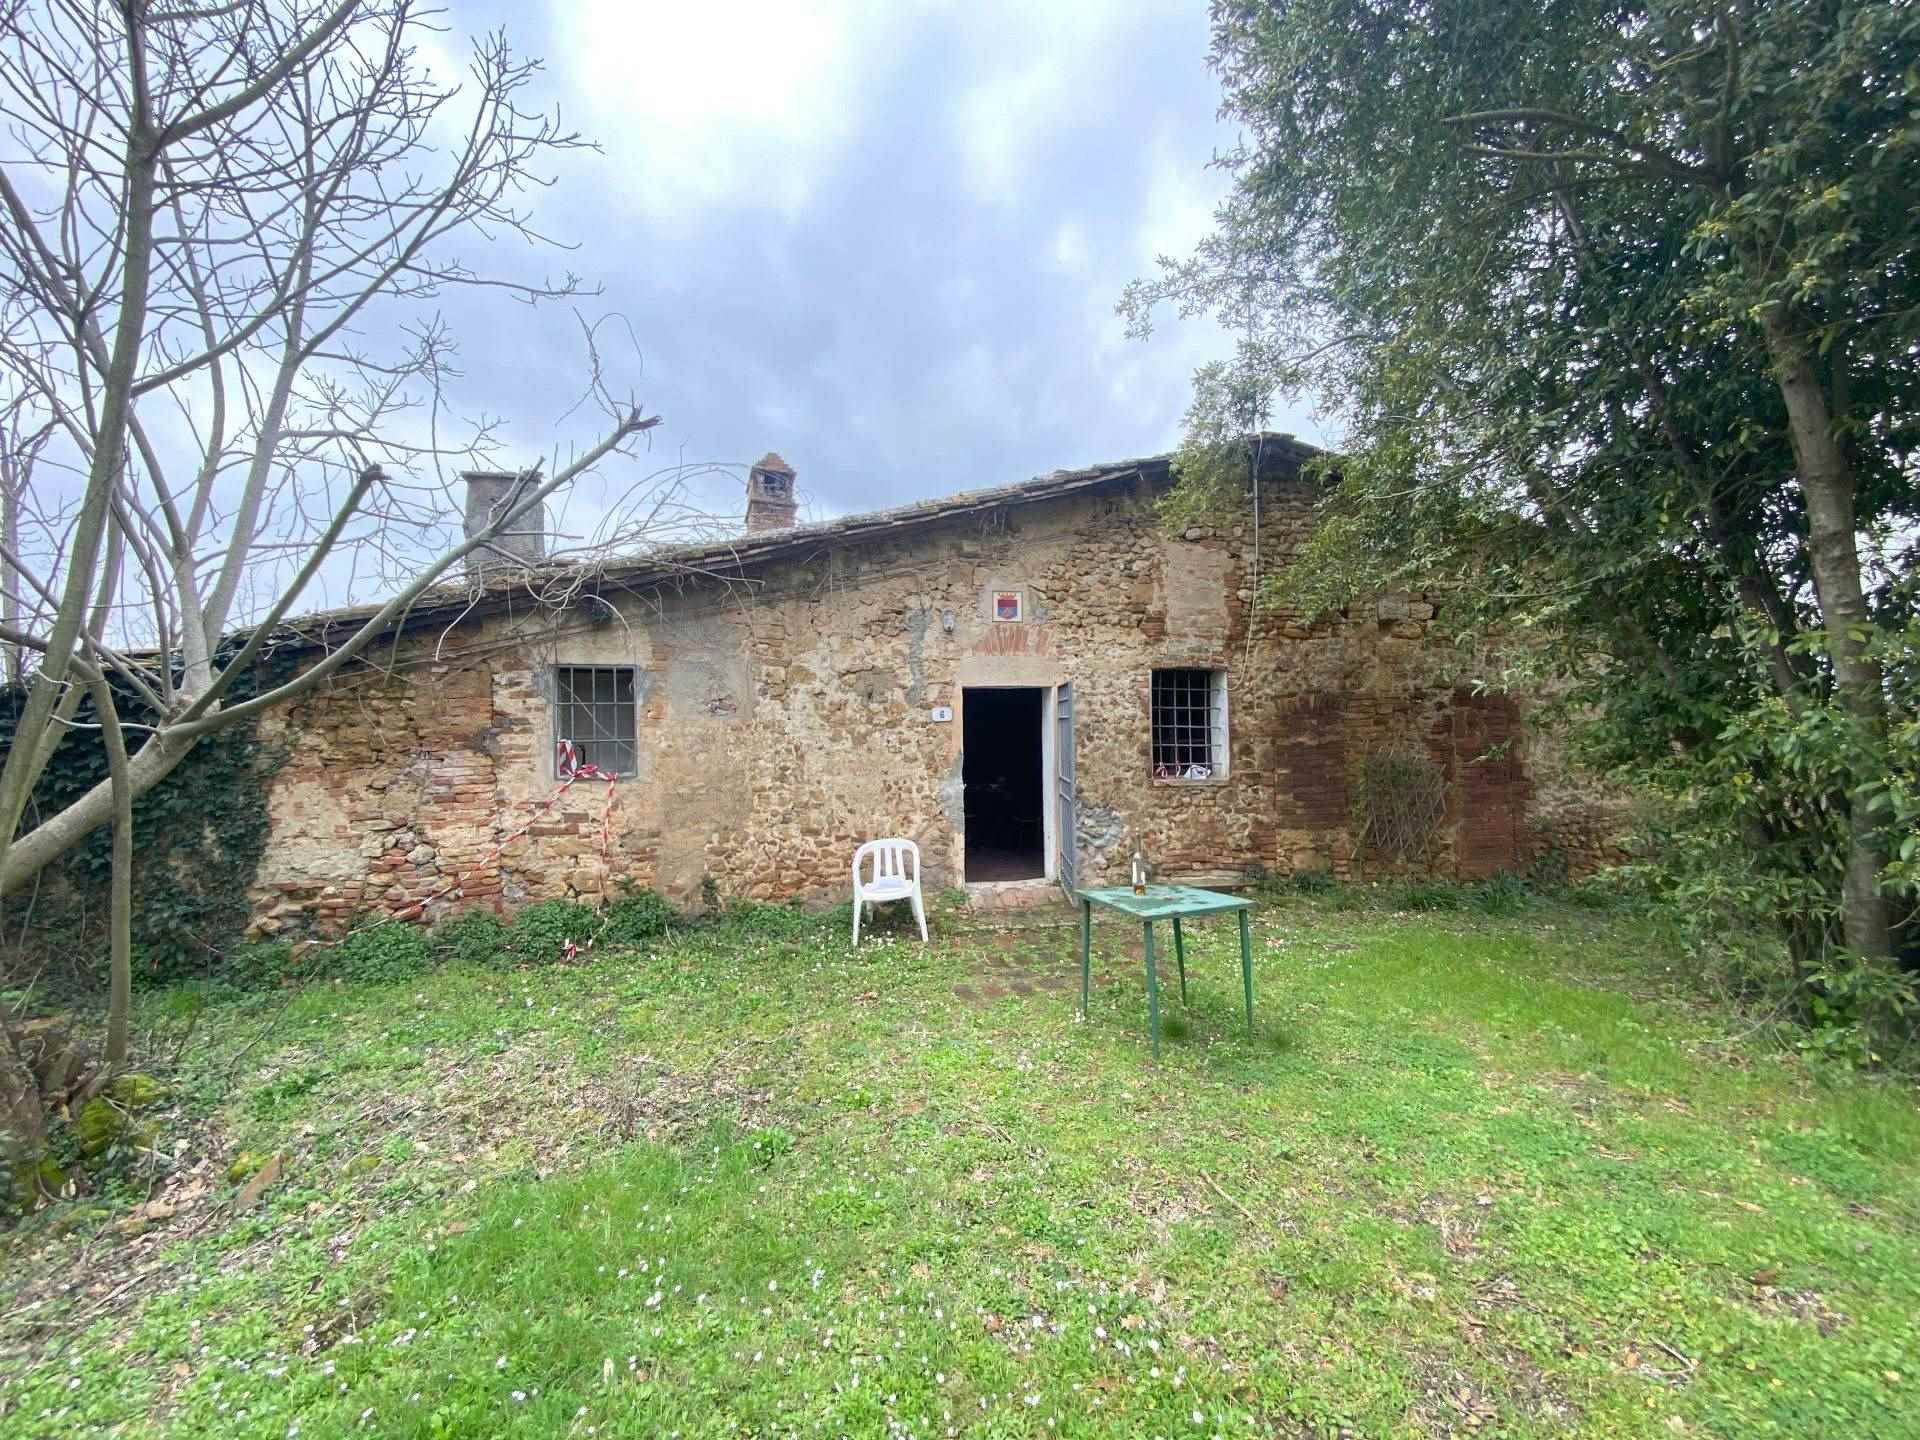 LA COLONNA, MONTERIGGIONI, Farmhouse for sale of 343 Sq. mt., Be restored, Heating Non-existent, Energetic class: G, Epi: 175 kwh/m2 year, placed at 